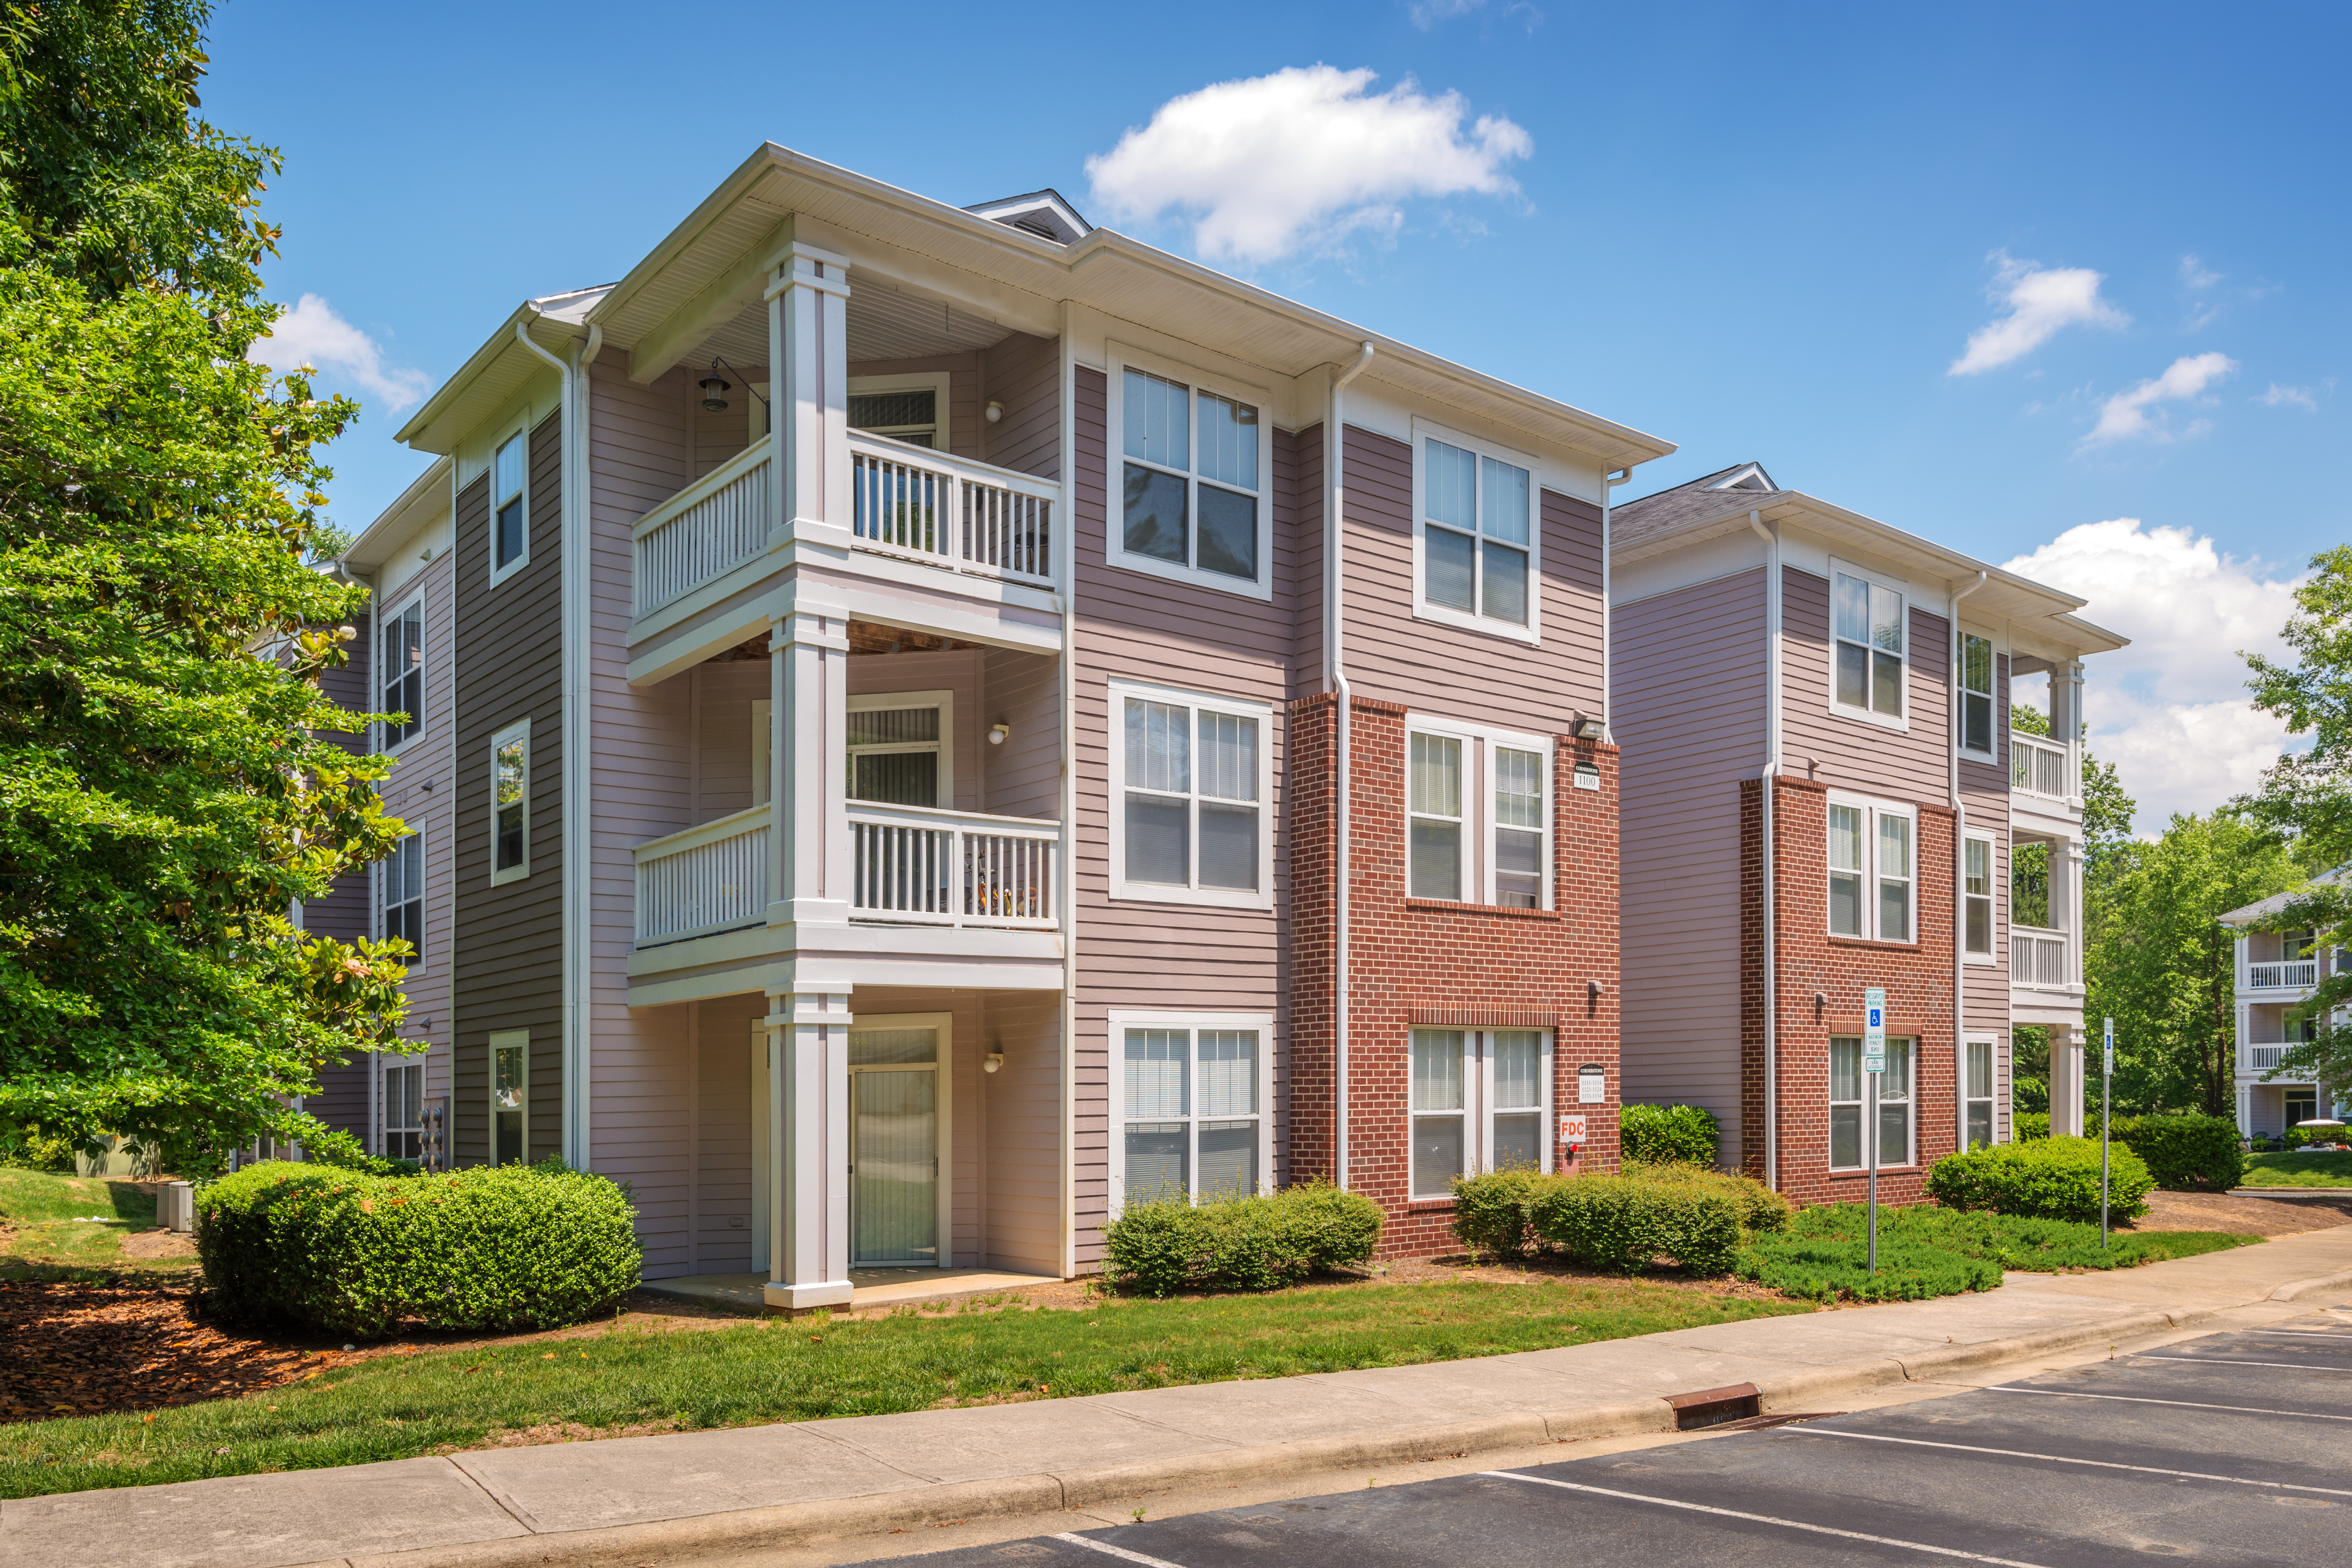 79 Cheap Apartments on davis drive cary nc With Flat Design